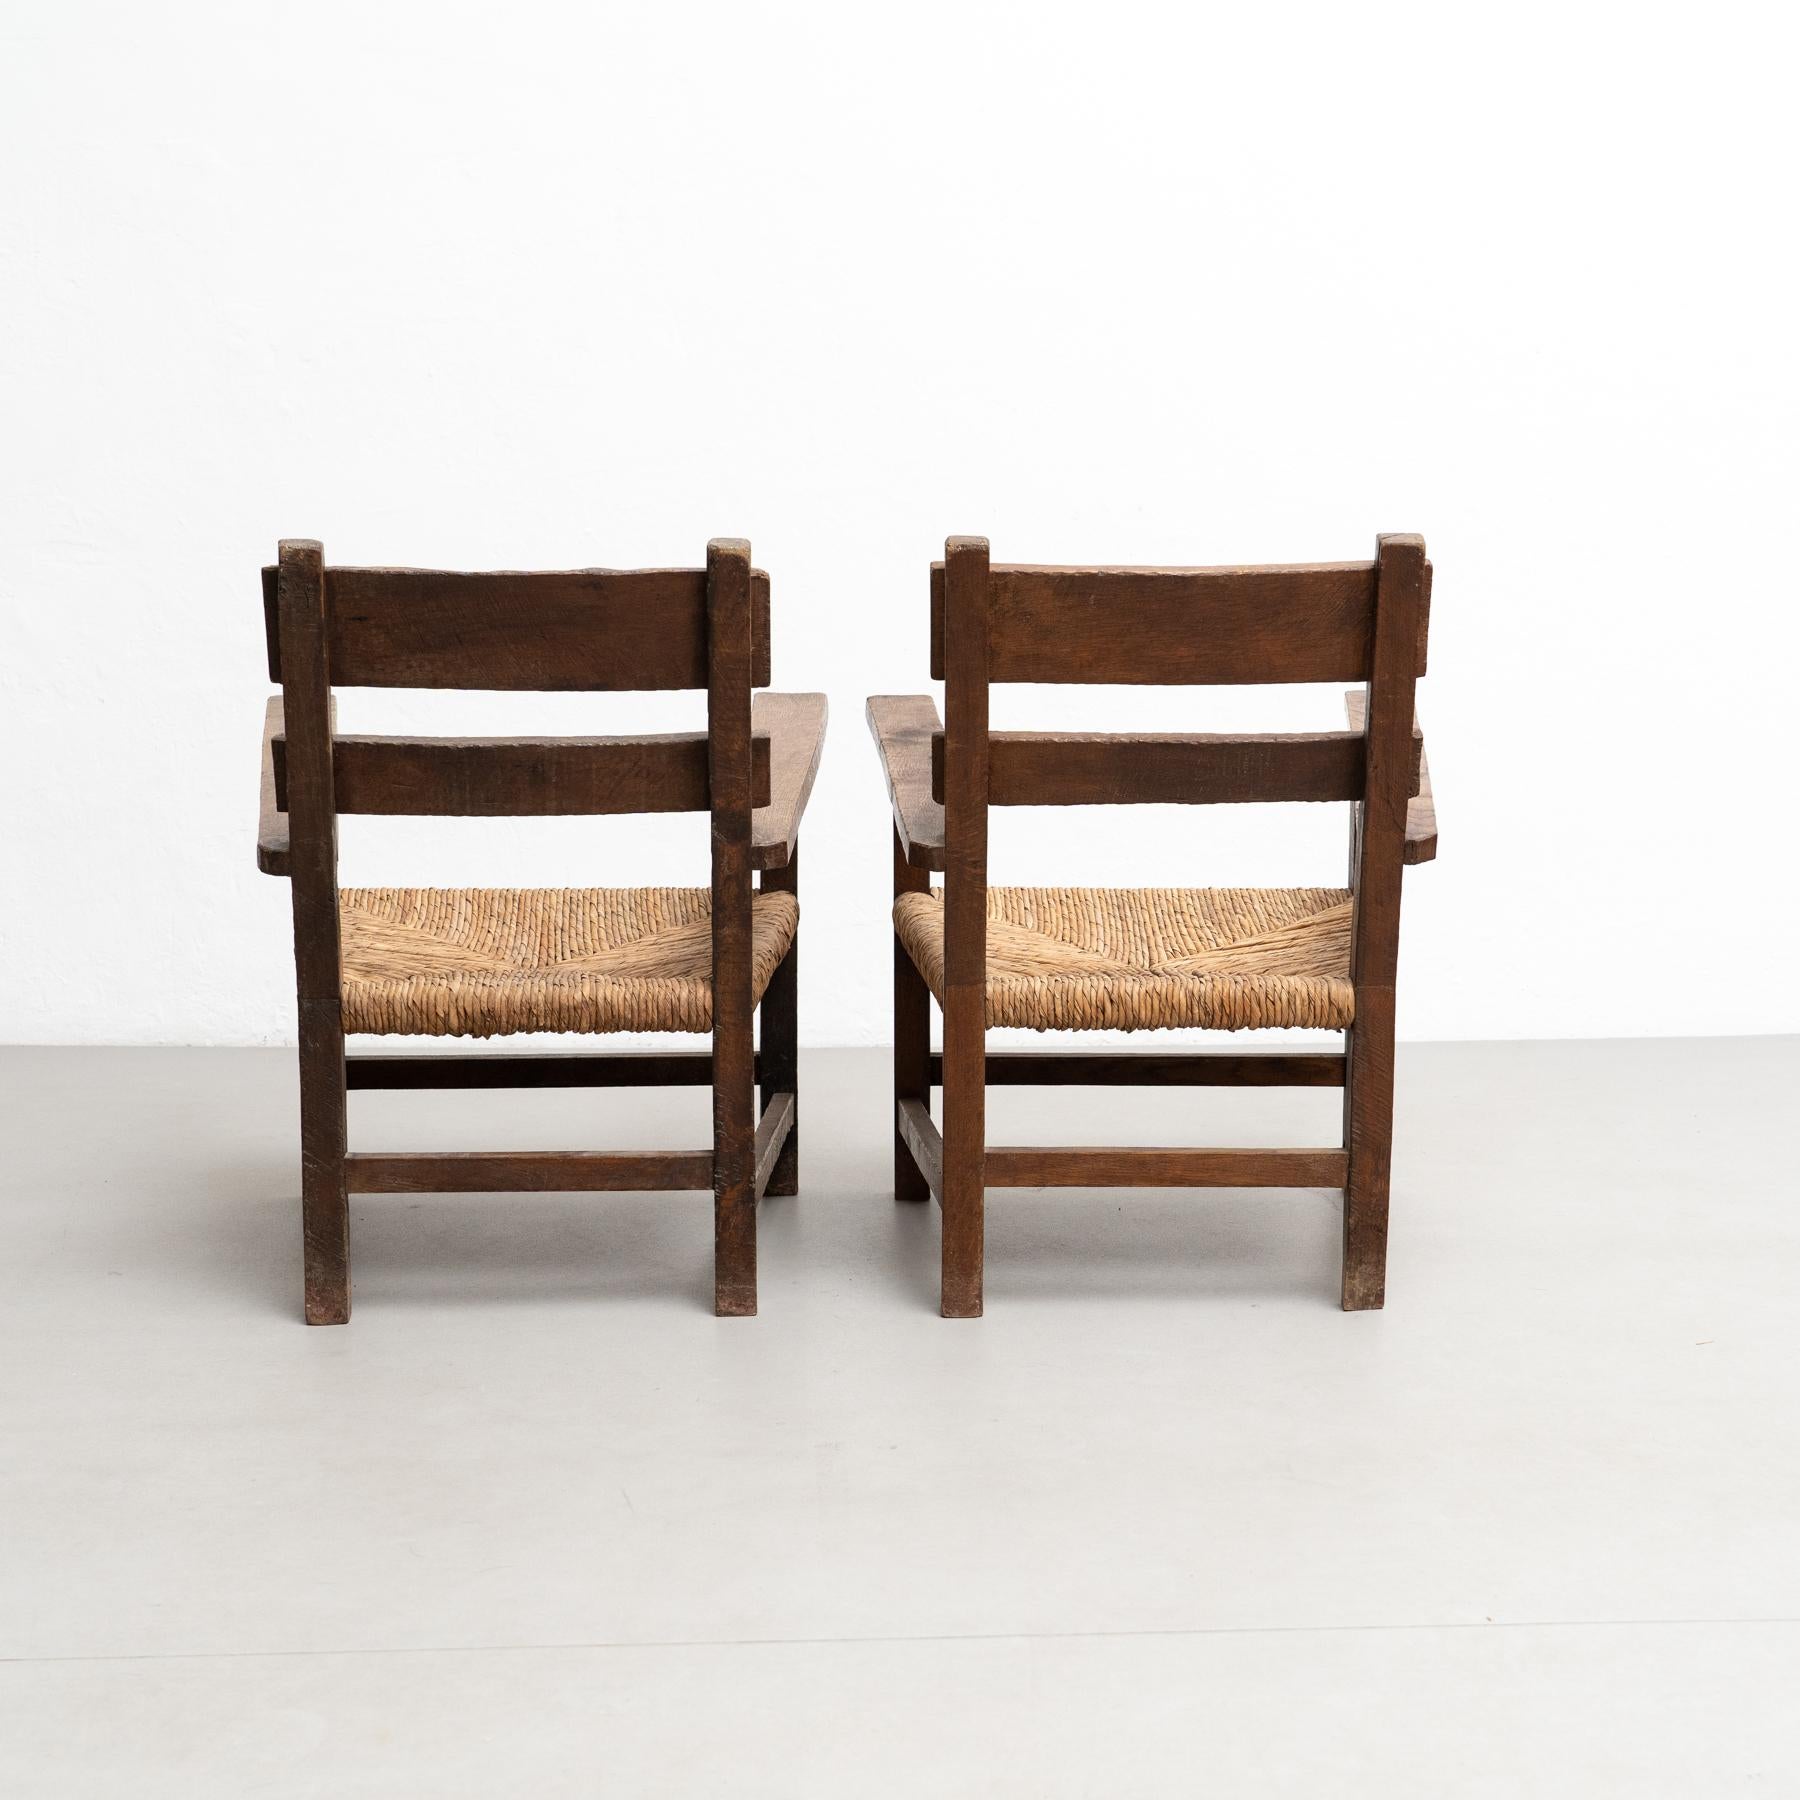 Mid-20th Century Set of Two Rustic Early 20th Century Armchairs in Solid Wood and Rattan For Sale